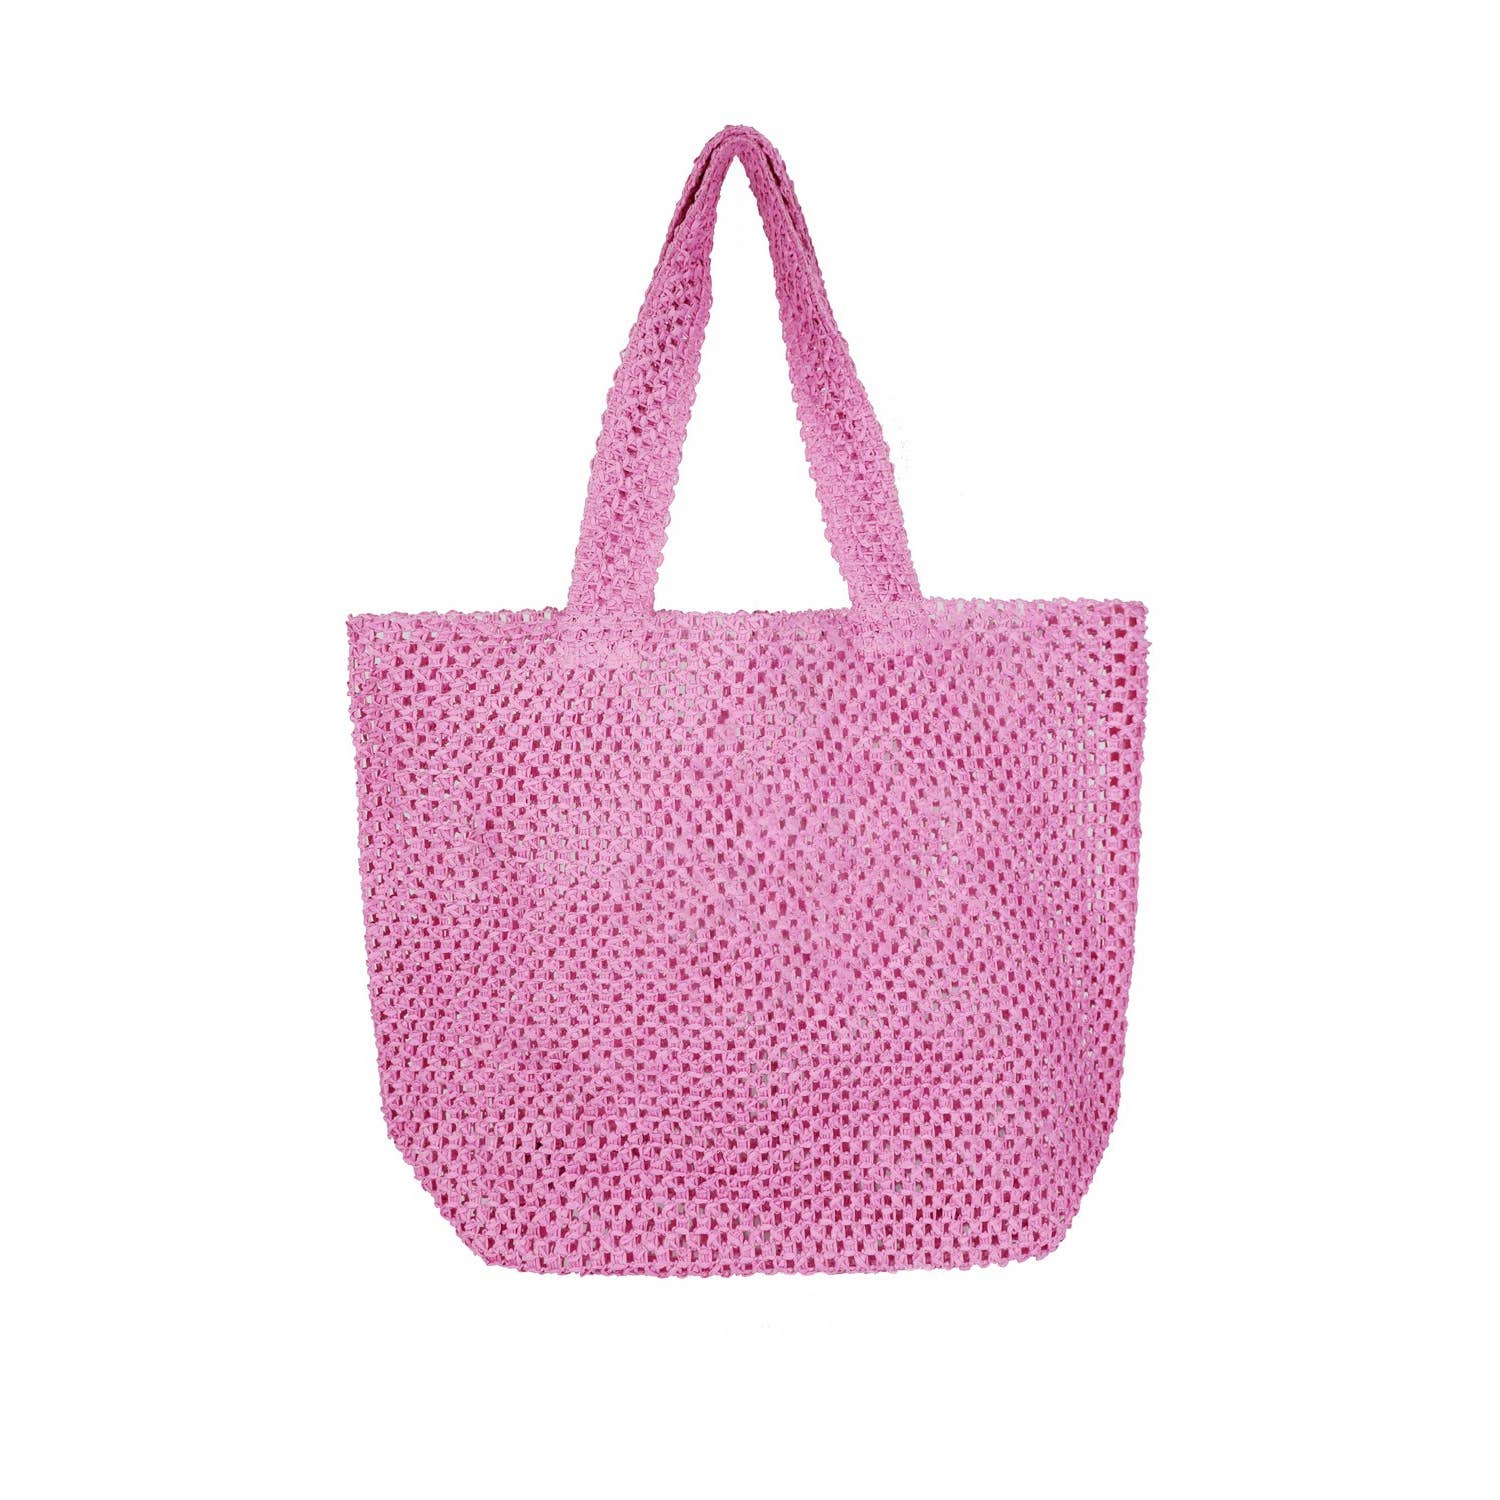 Collections by Fame Accessories - Straw Braid Square Tote Bag